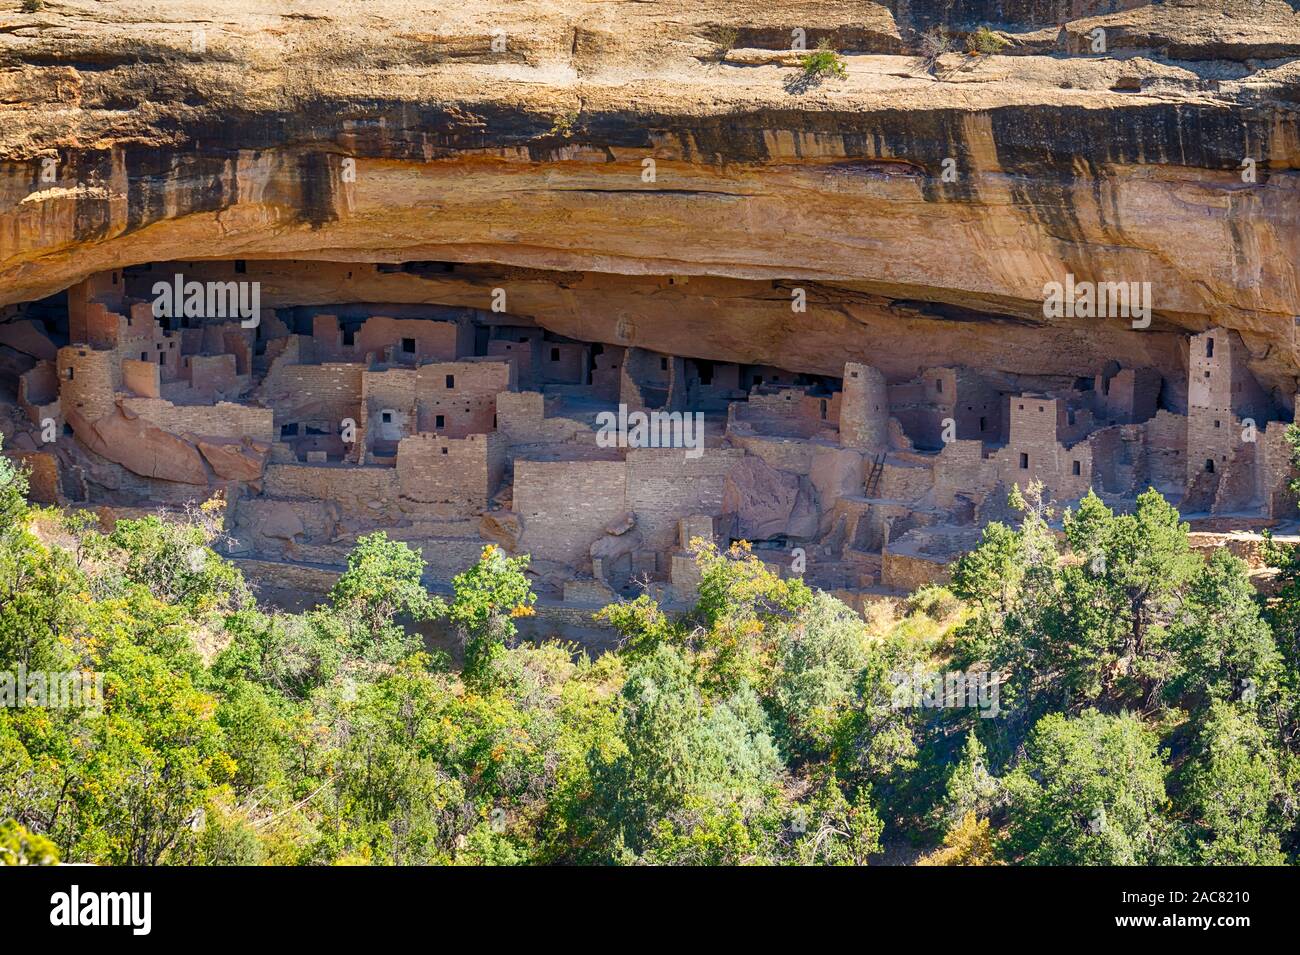 Cliff Palace dwellings in Mesa Verde National Park, Colorado Stock Photo